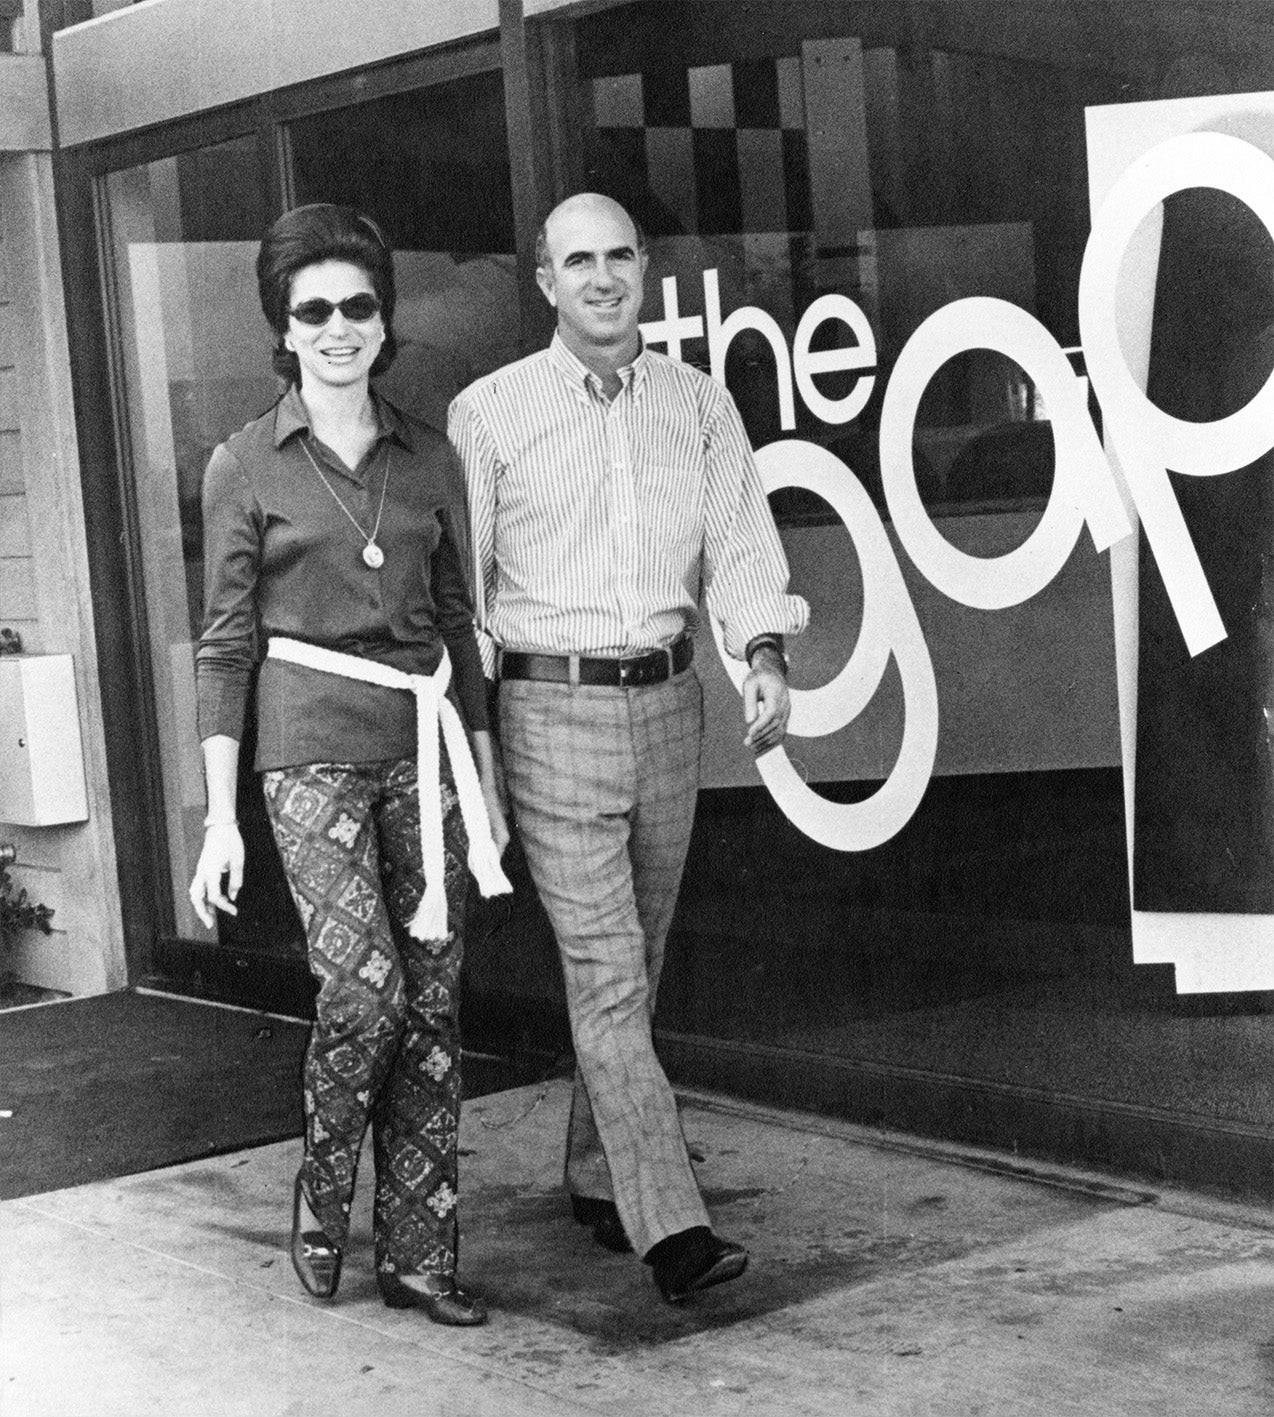 The Fishers pictured outside the first-ever Gap store in 1969.